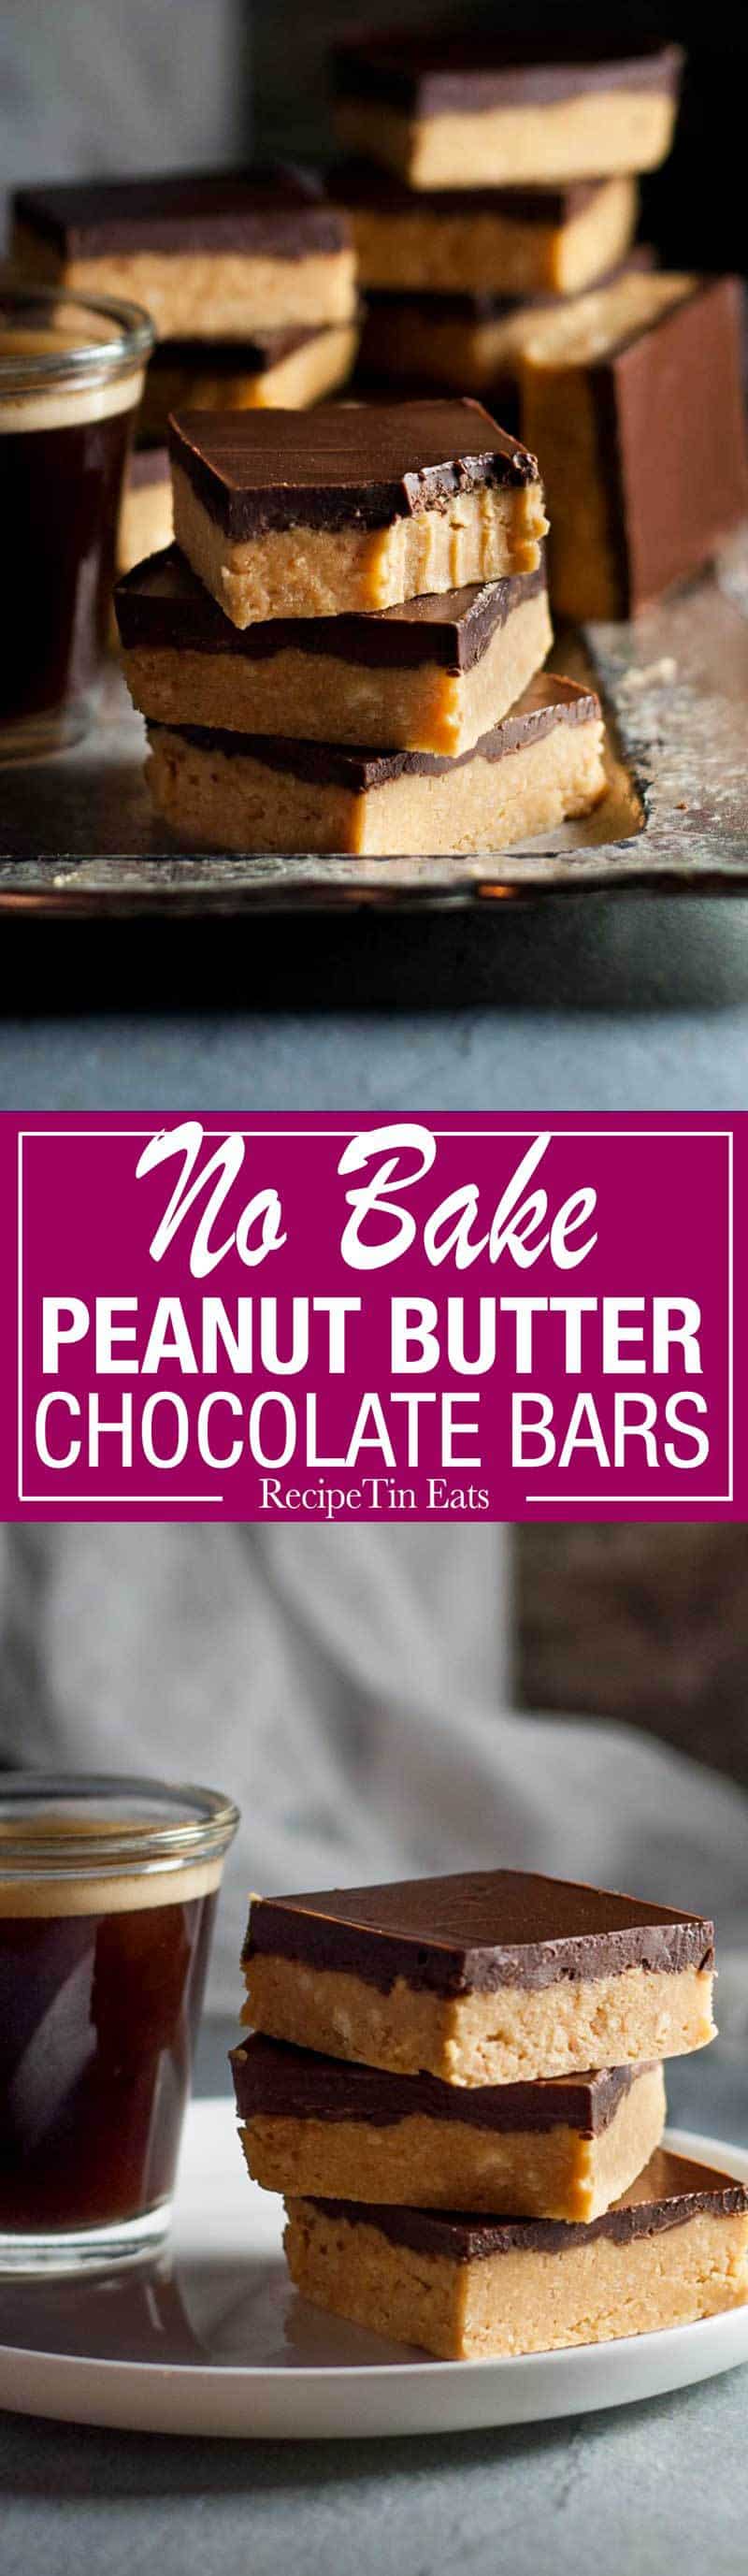 Chocolate, peanut butter, Graham Crackers, butter and sugar is all you need. They taste like Reece's Peanut Butter cups!